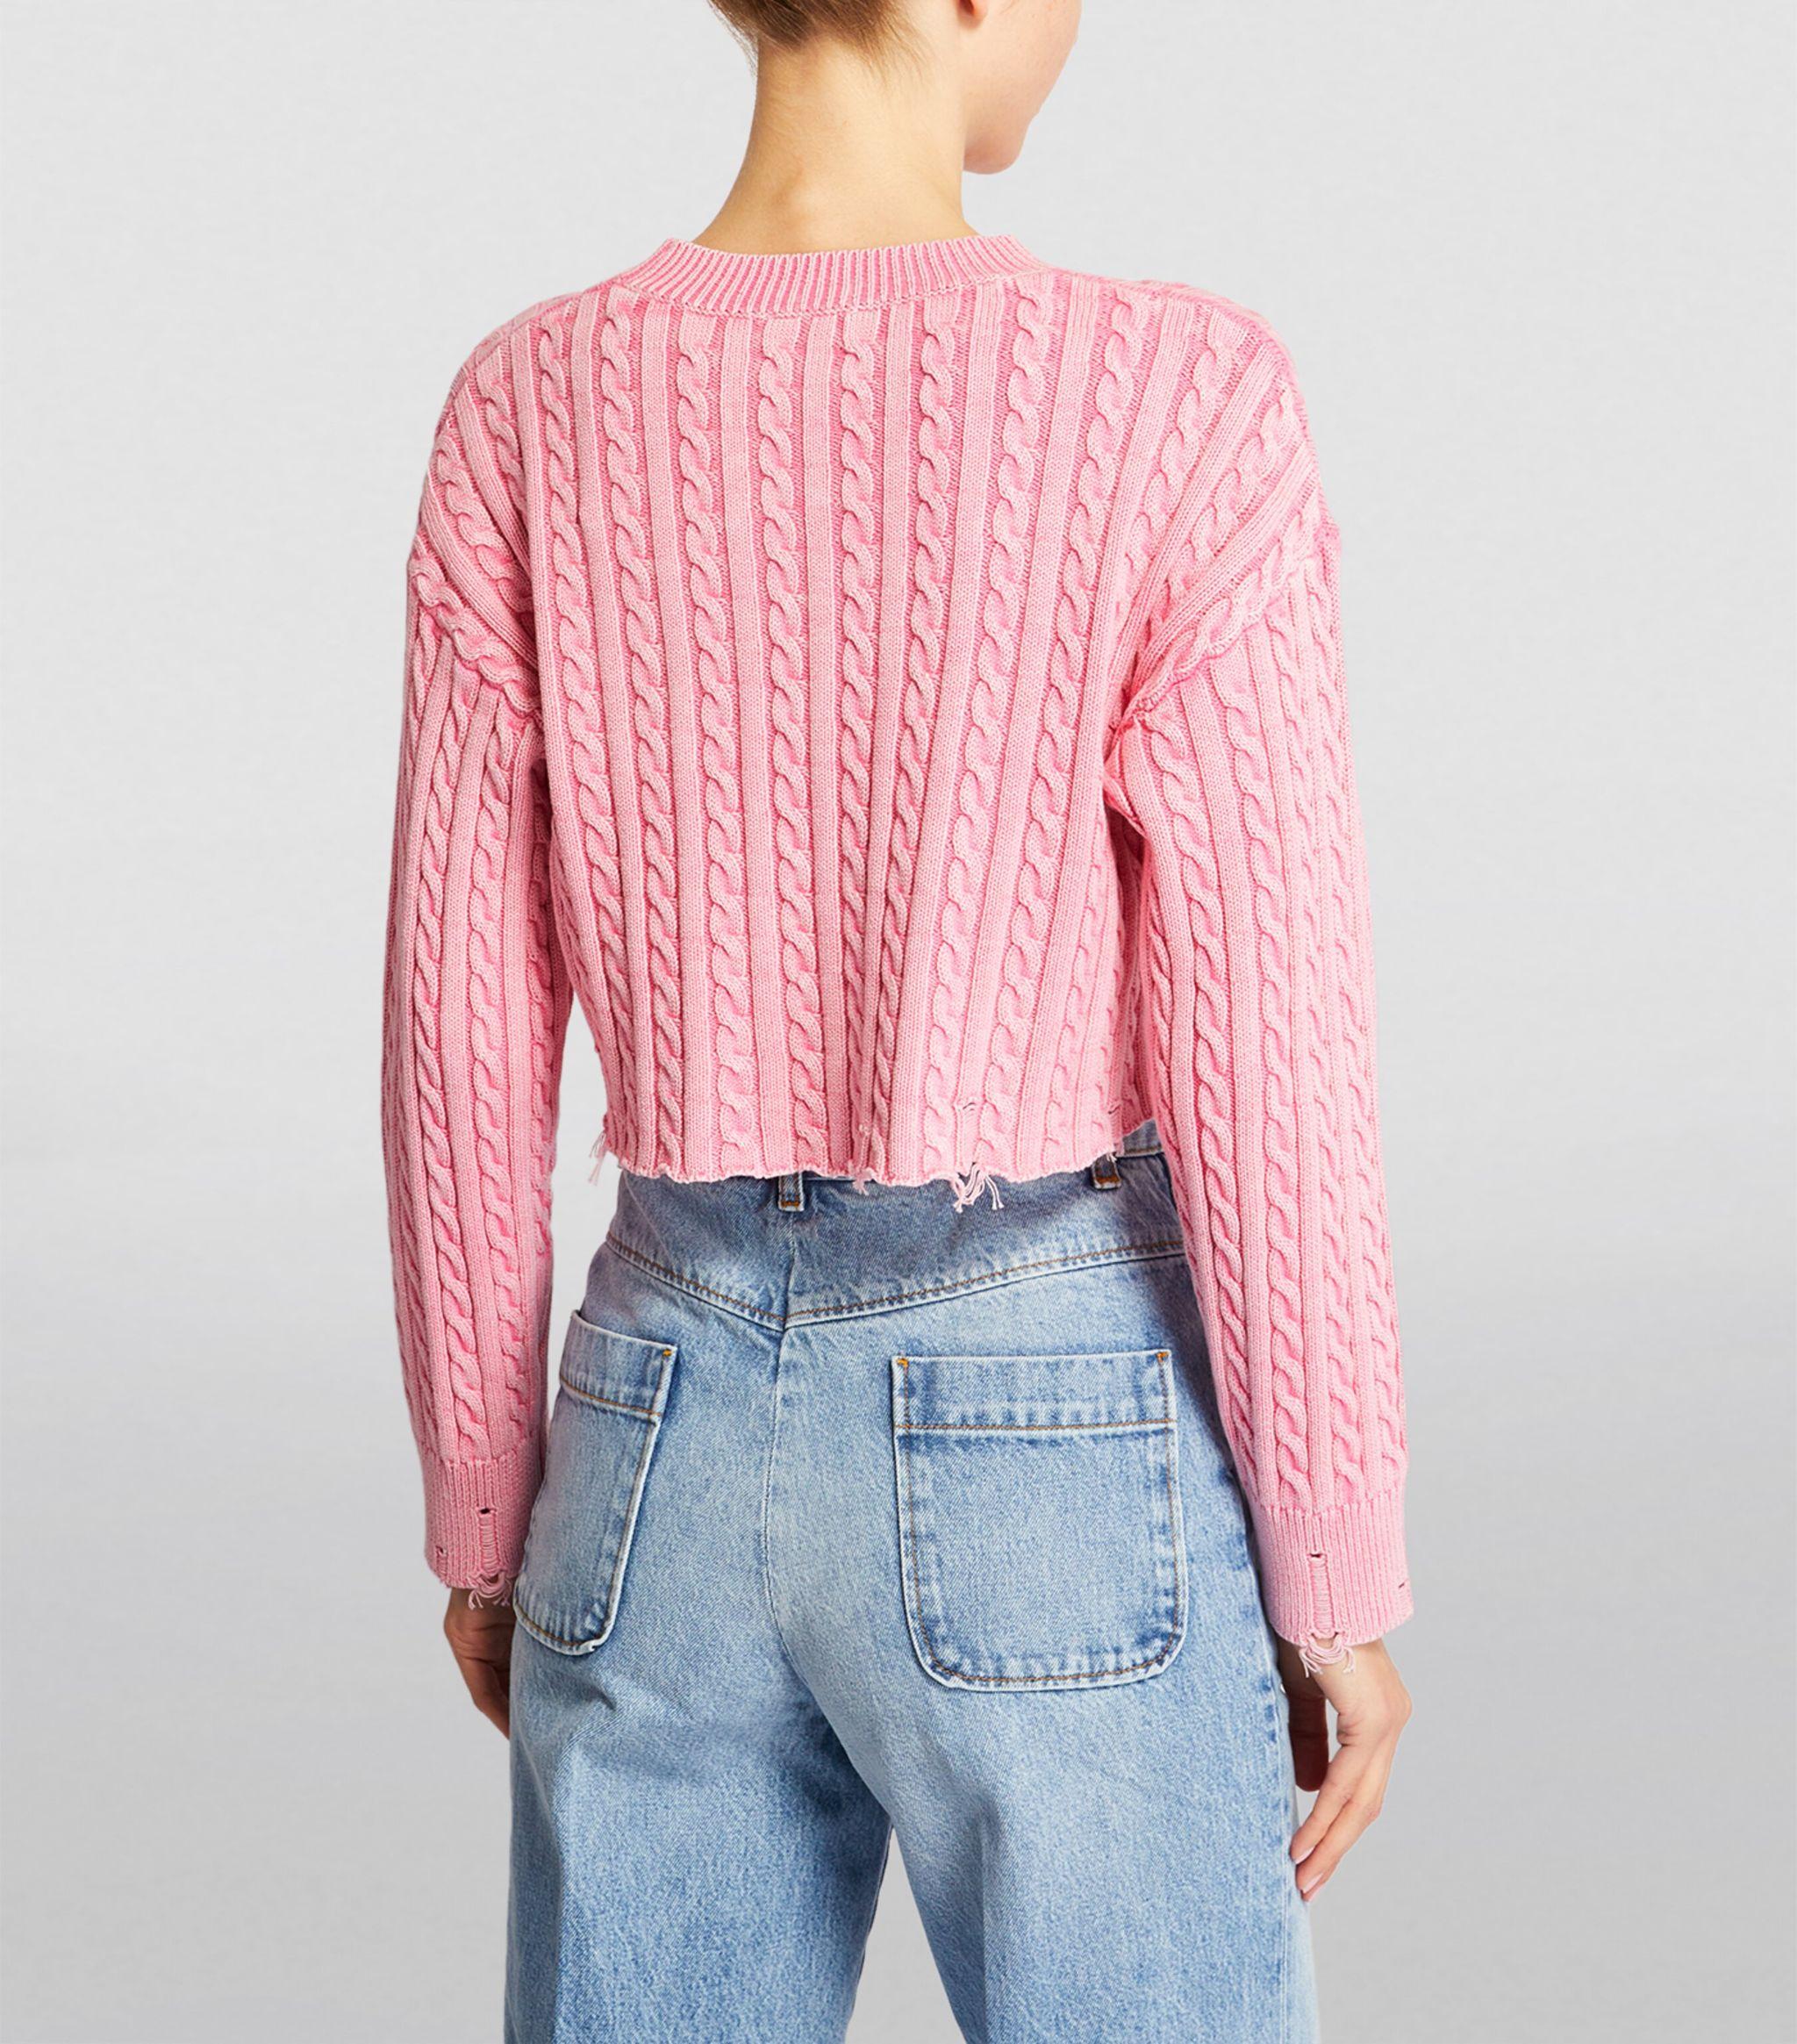 Sandro Cropped Smiley Sweater in Pink | Lyst